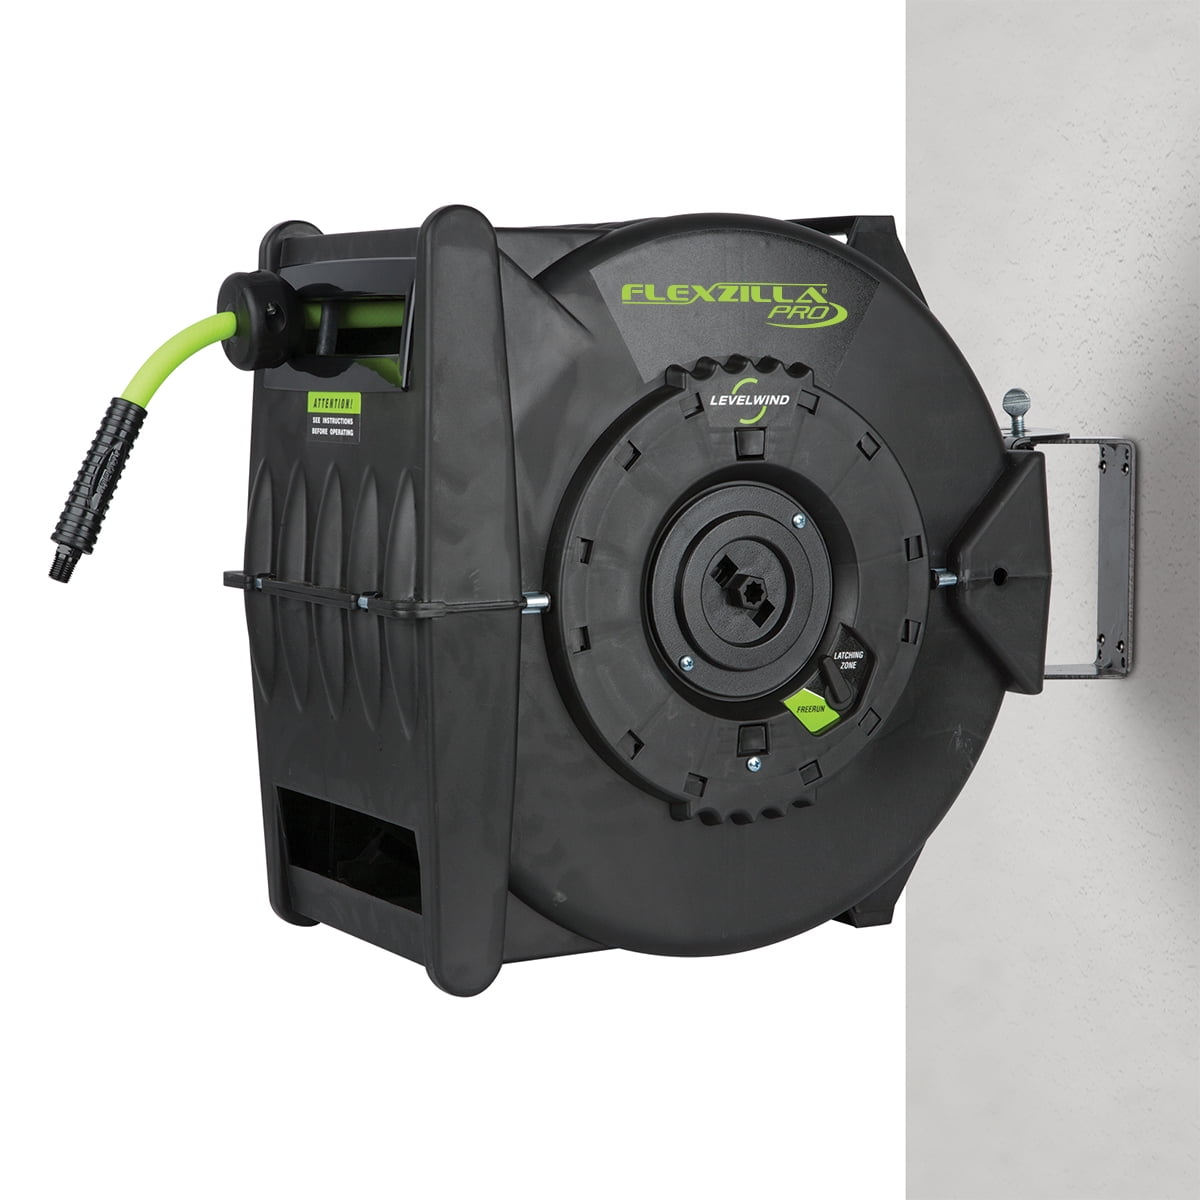 Flexzilla® Pro Retractable Air Hose Reel with Levelwind